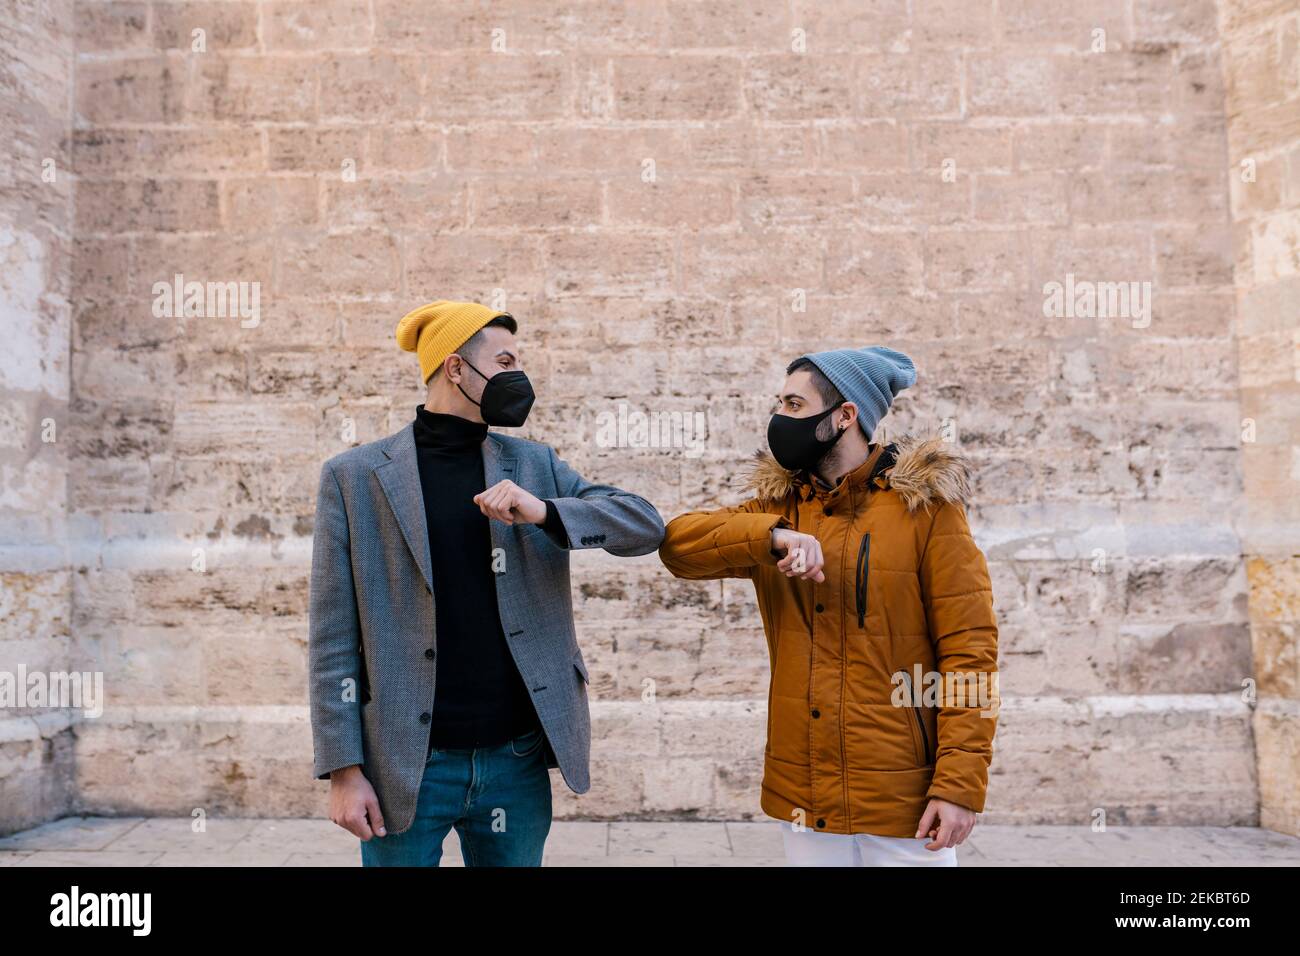 Young men wearing knit hat and protective face mask giving elbow bump while greeting against wall Stock Photo